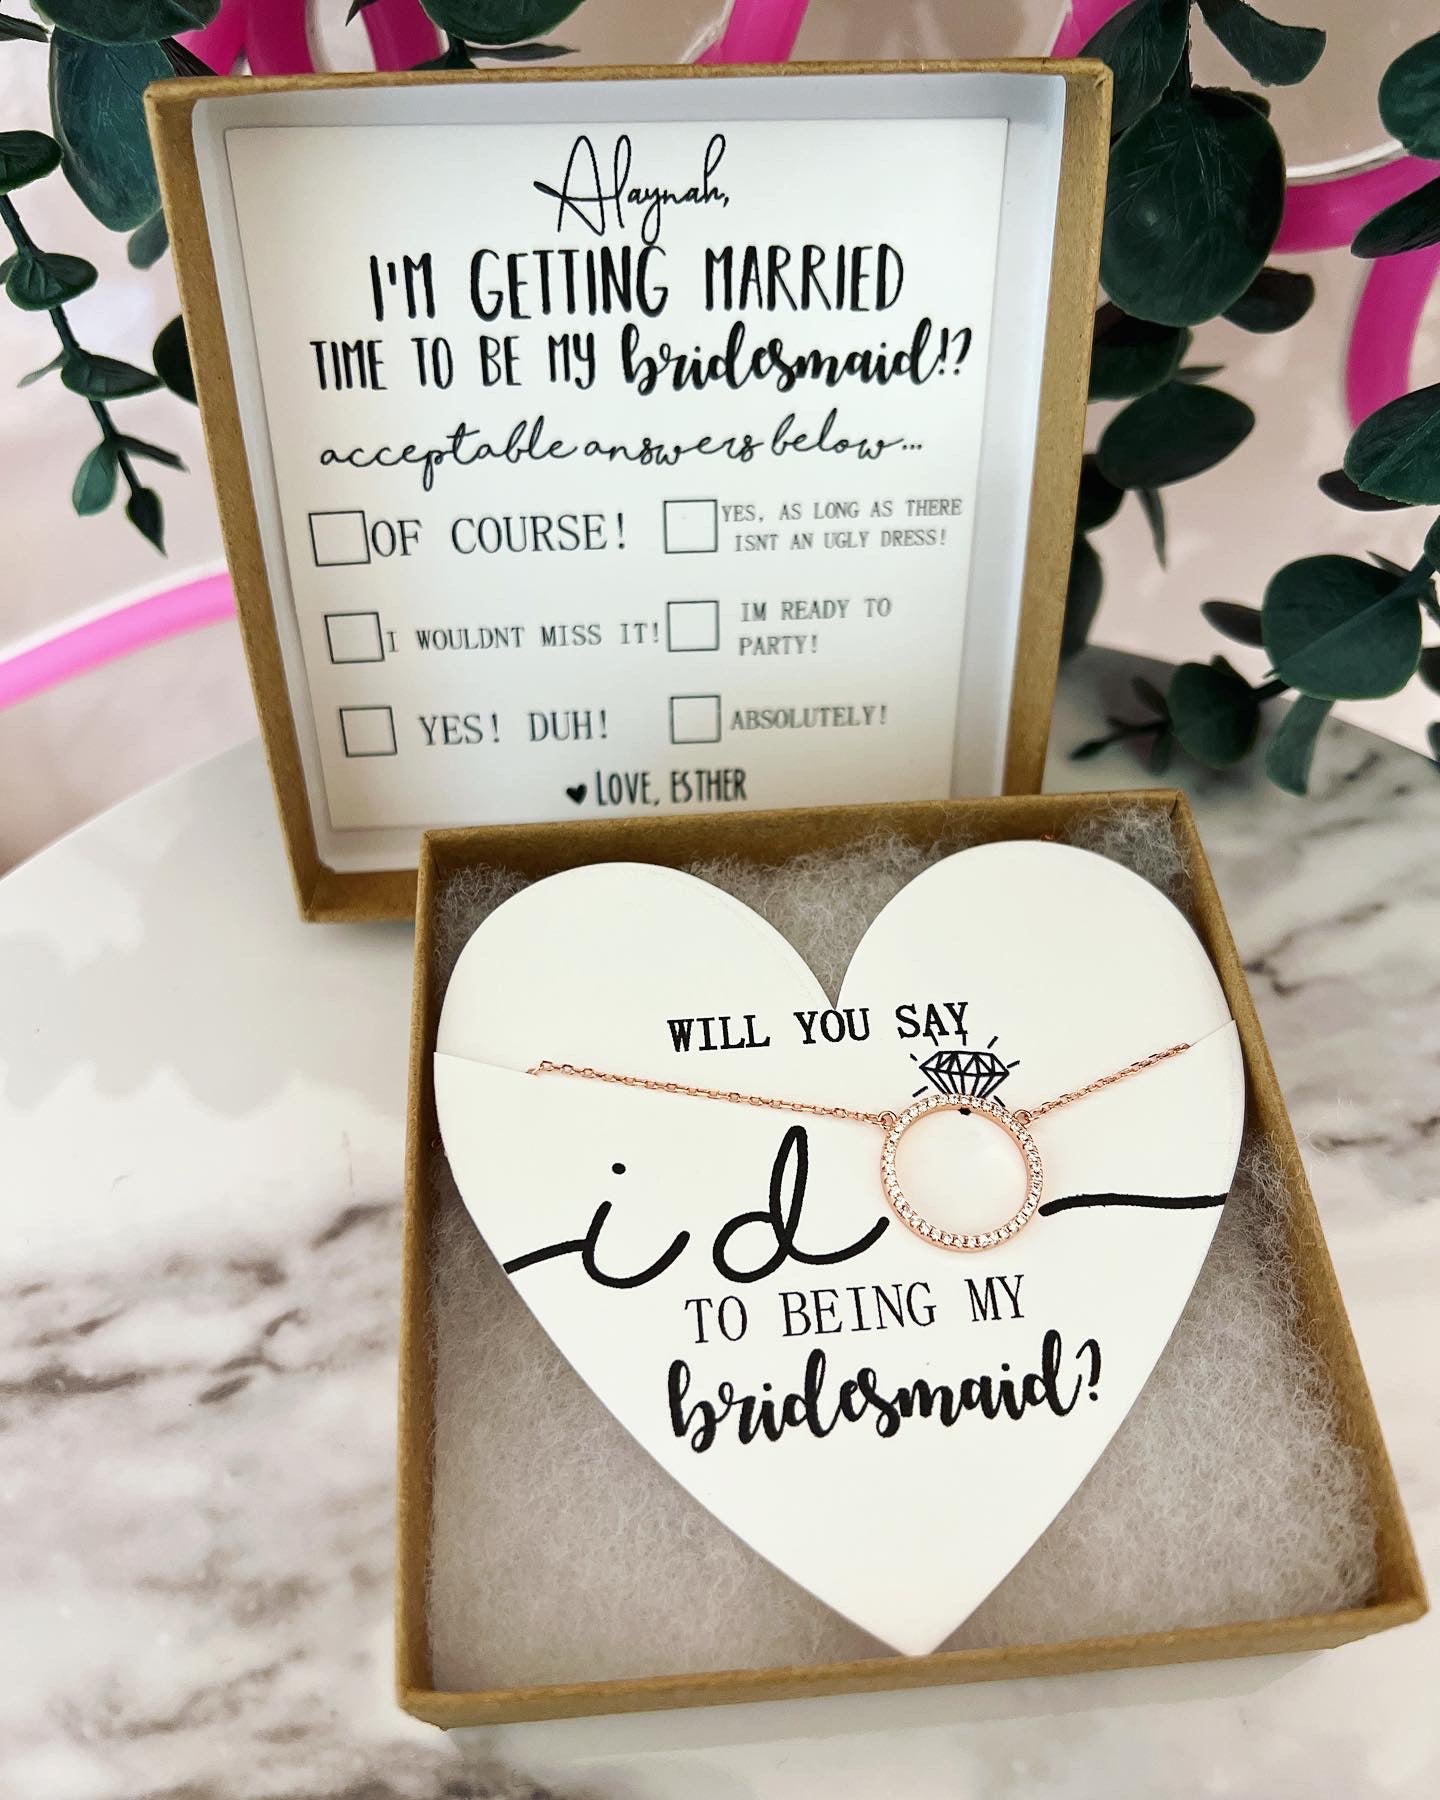 I'm Getting Married! Be My Bridesmaid?